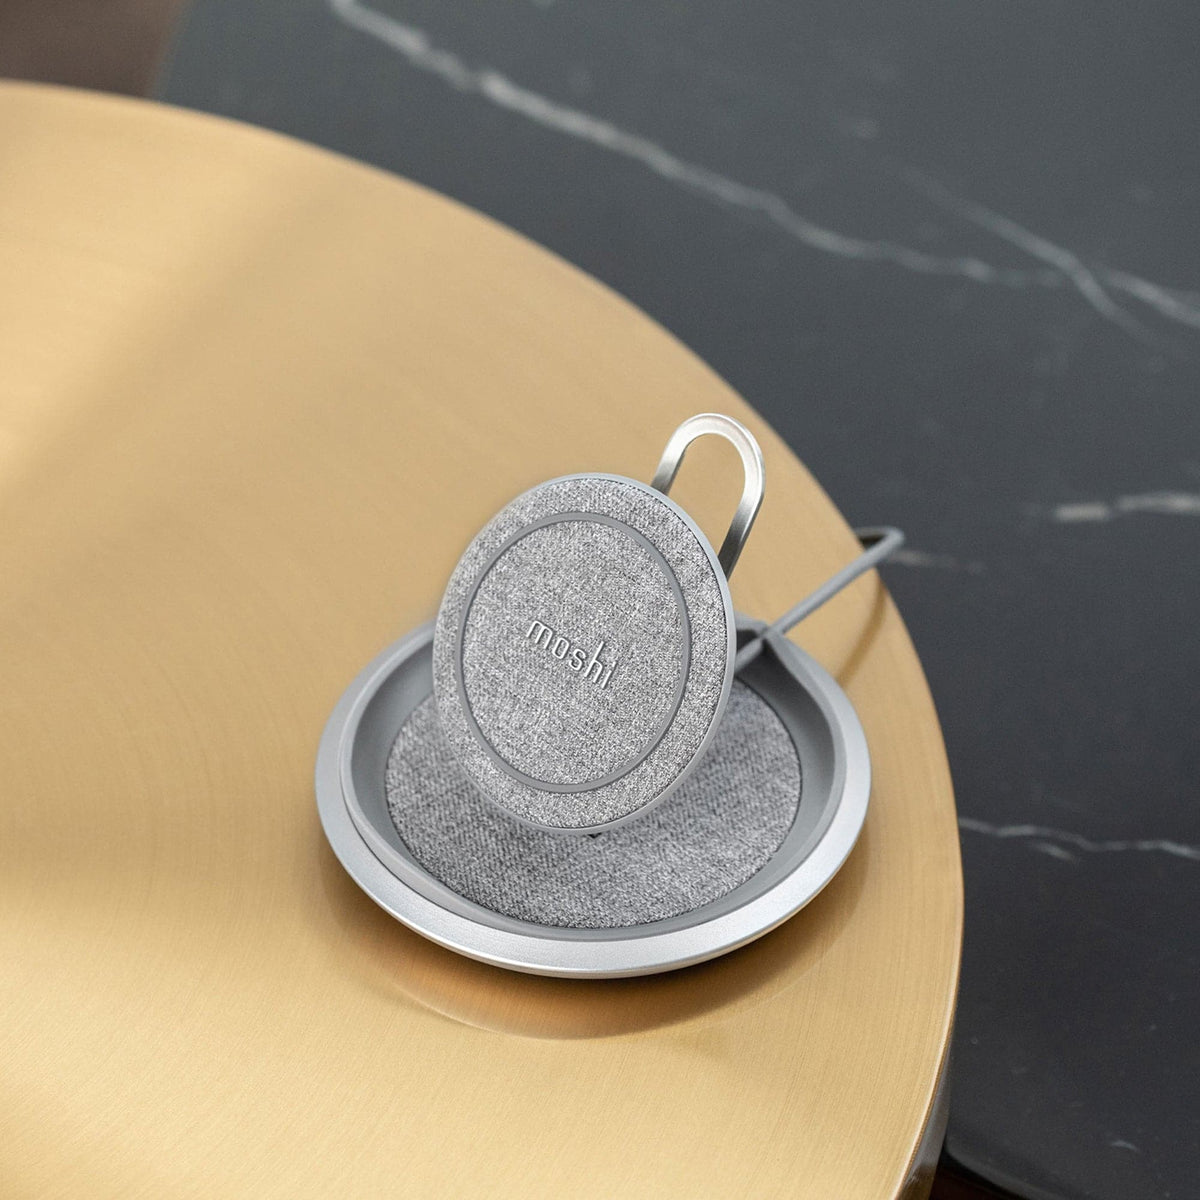 Moshi Lounge Q Wireless Charging Stand, Fast-charging with Adjustable-Height for all Phones